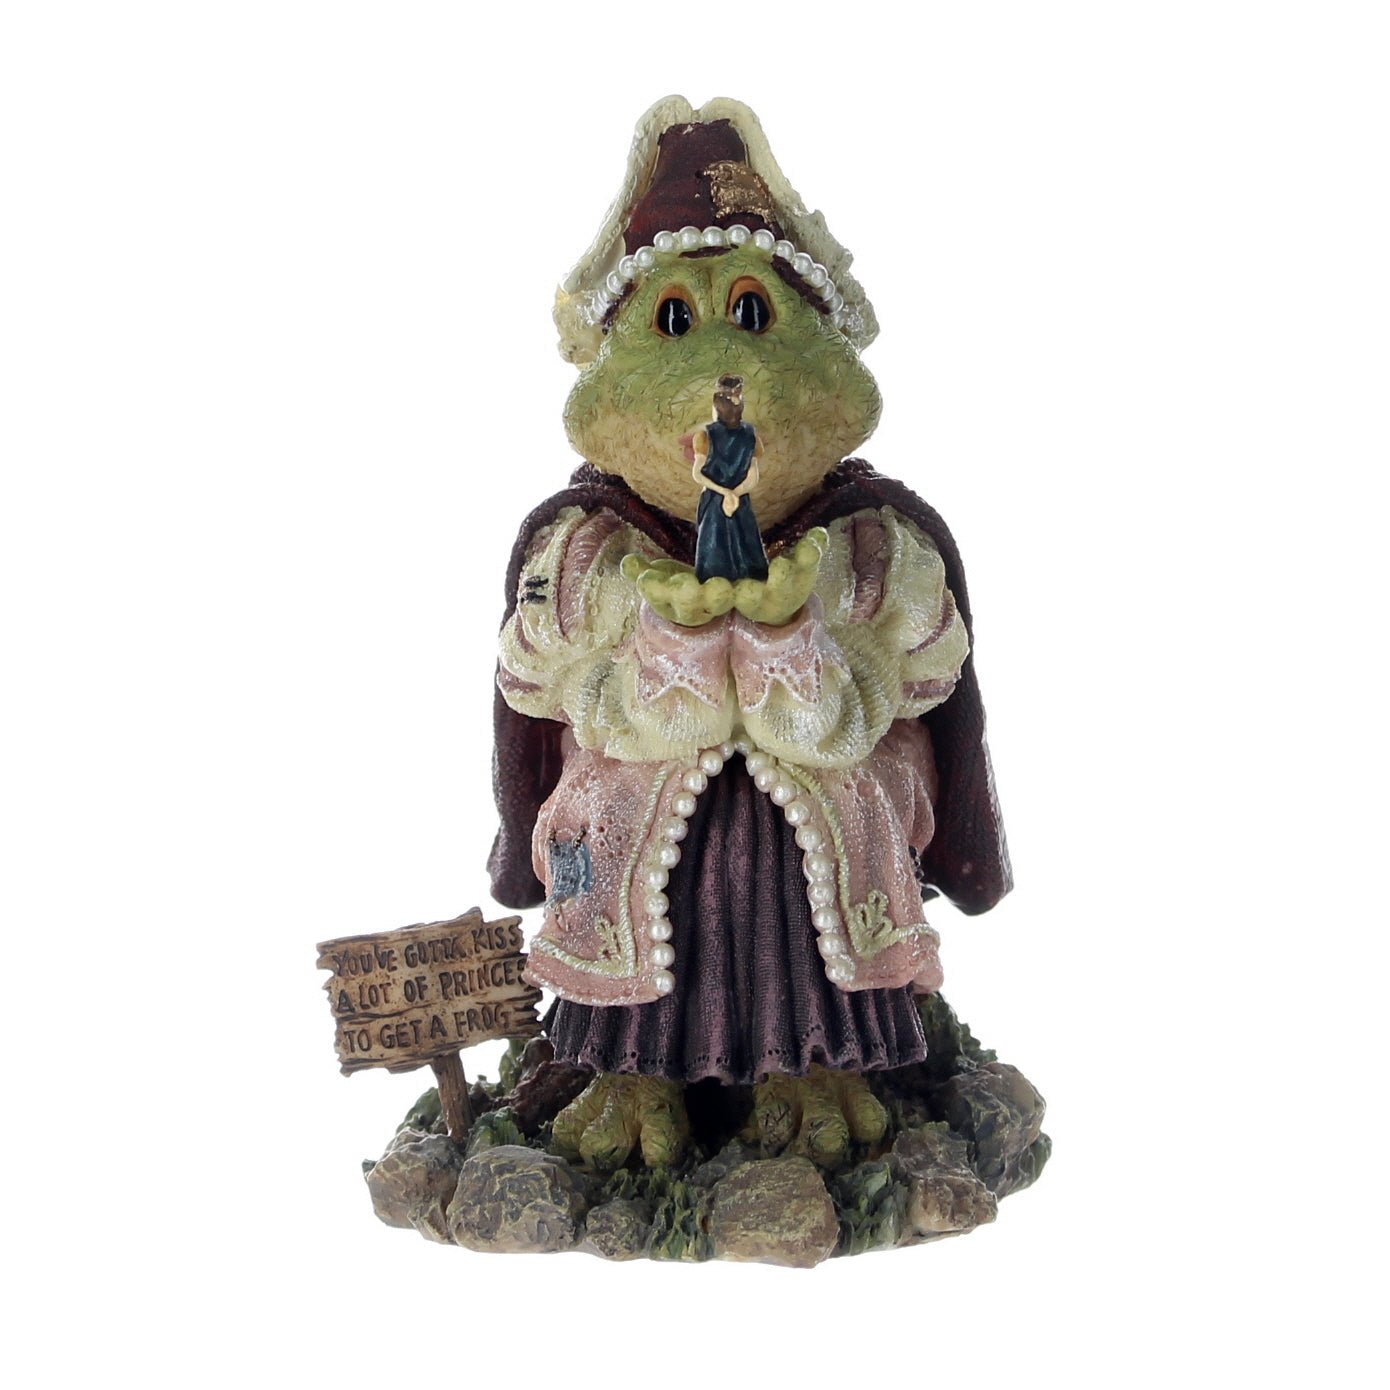 The-Wee-Folkstone-Collection-Resin-Figurine-Princess-Pickerup-Kiss-Me-Quick-36707